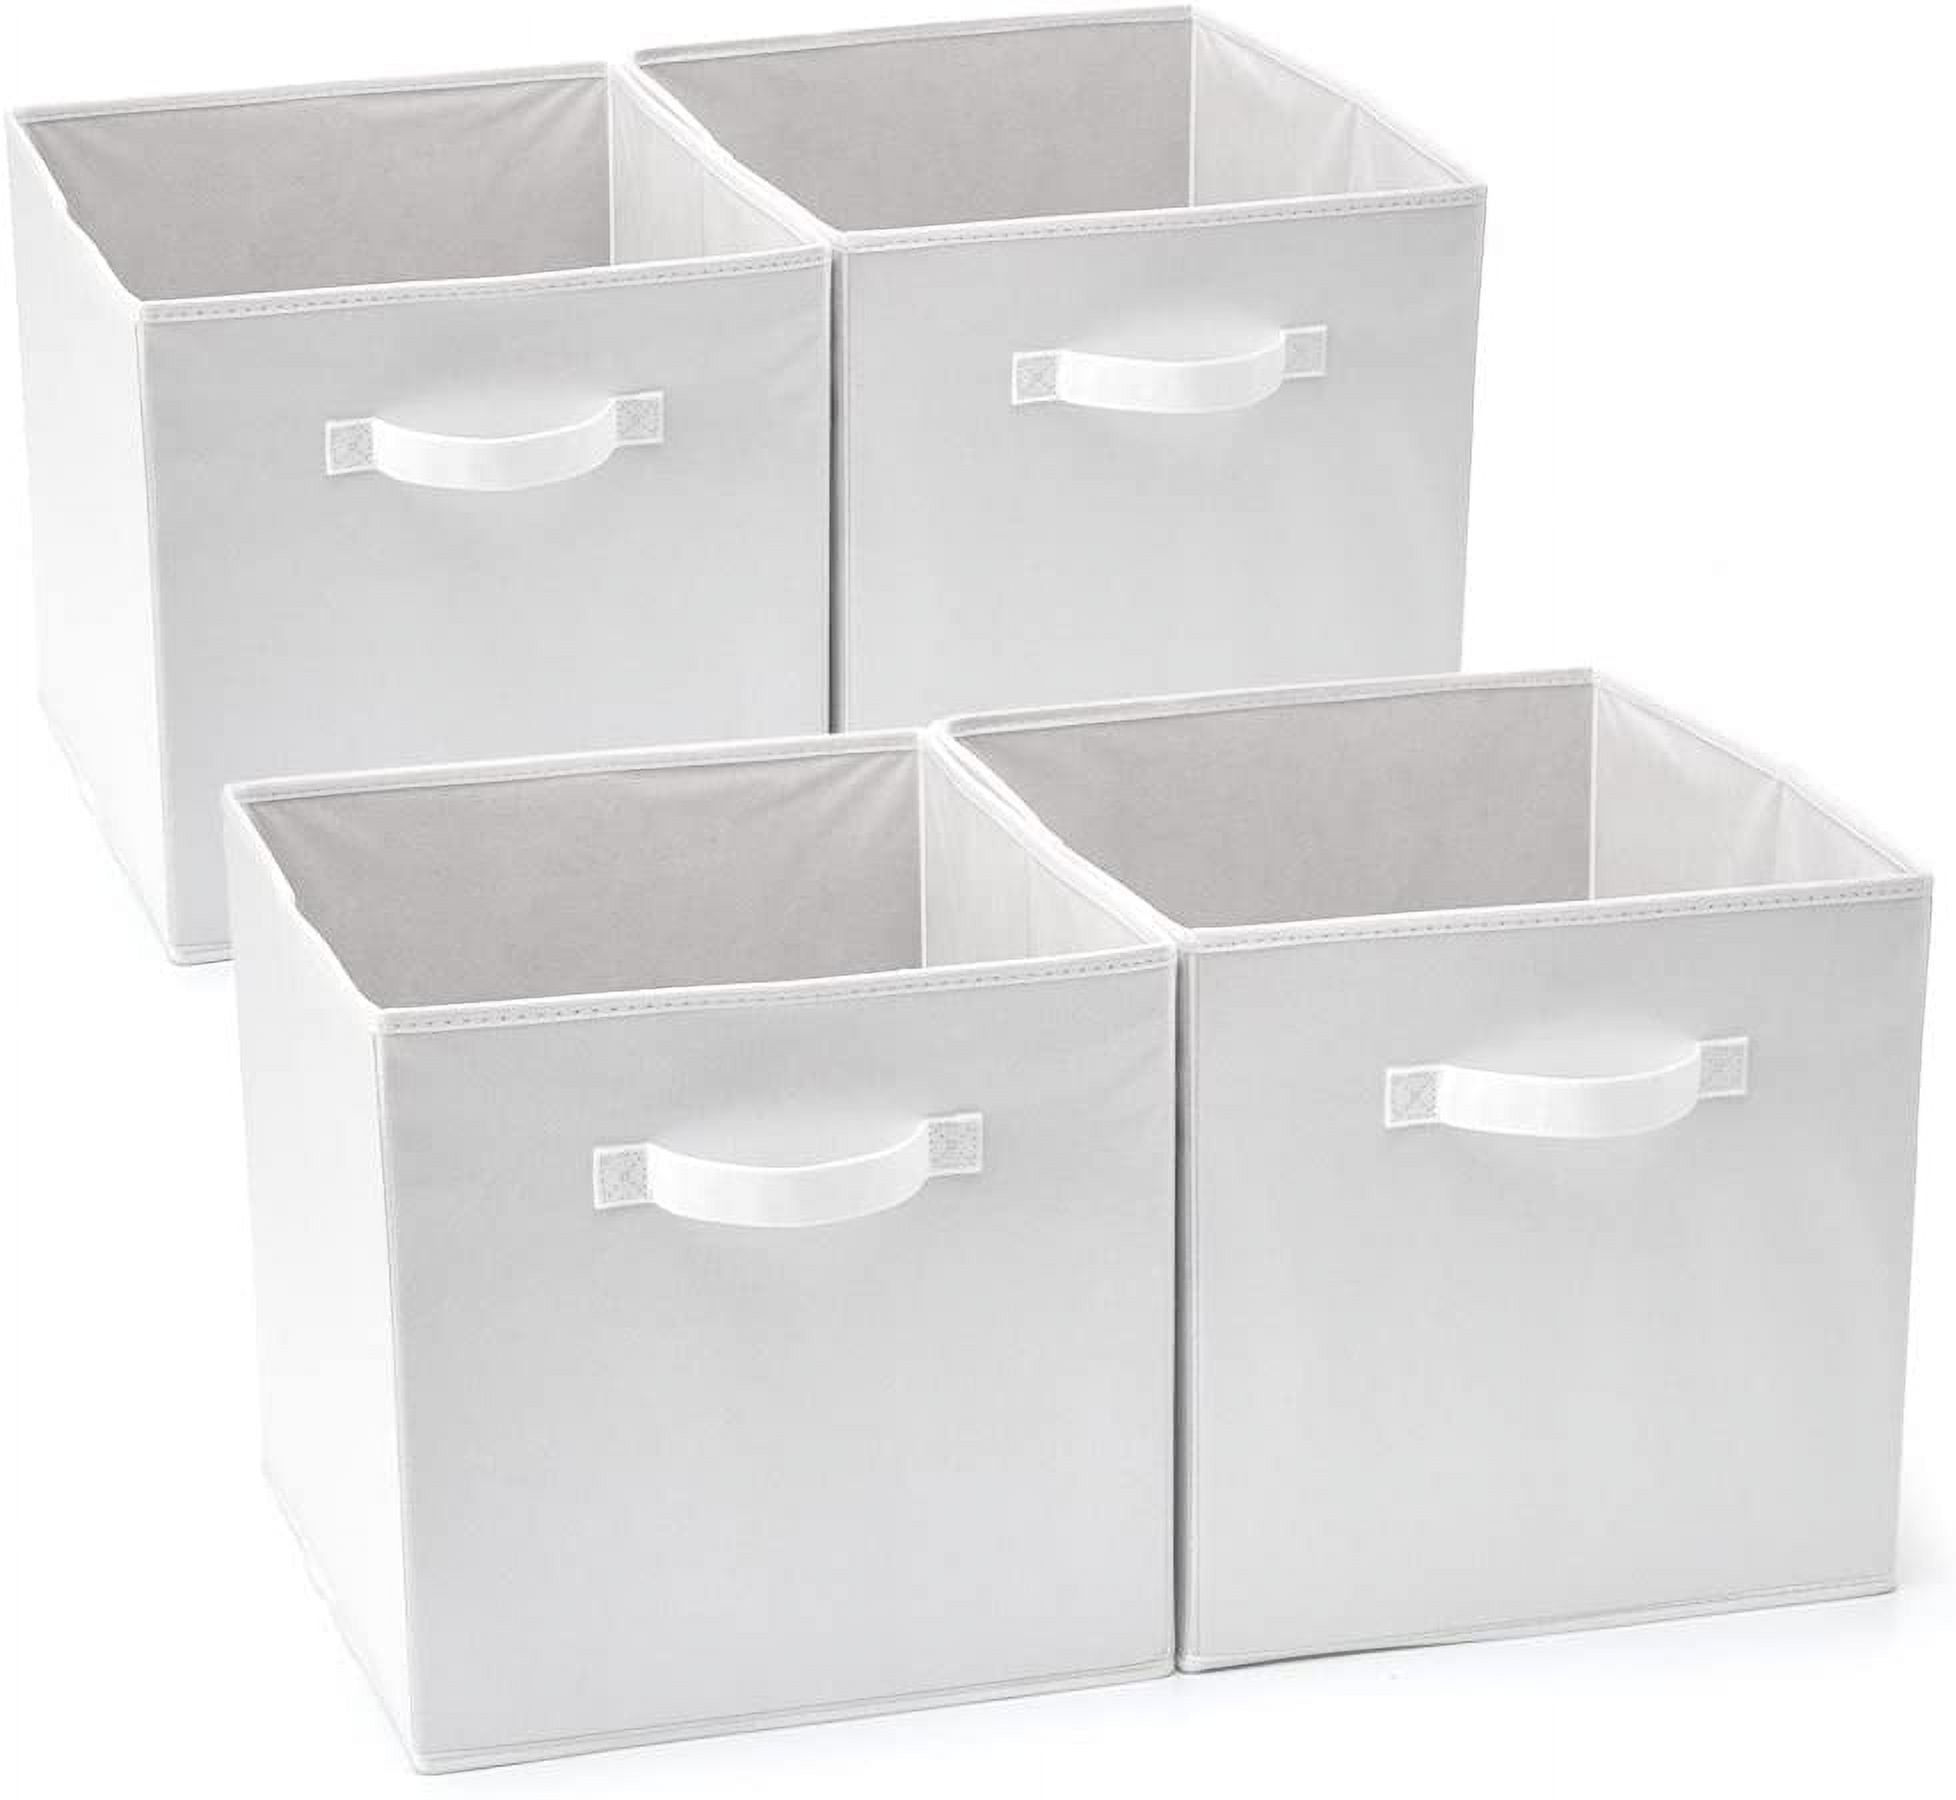 Set Of 3 Foldable Cloth Canvas Storage Boxes, Storage Baskets With Handles 33  X 33 X 33 Cm, Gray And Beige